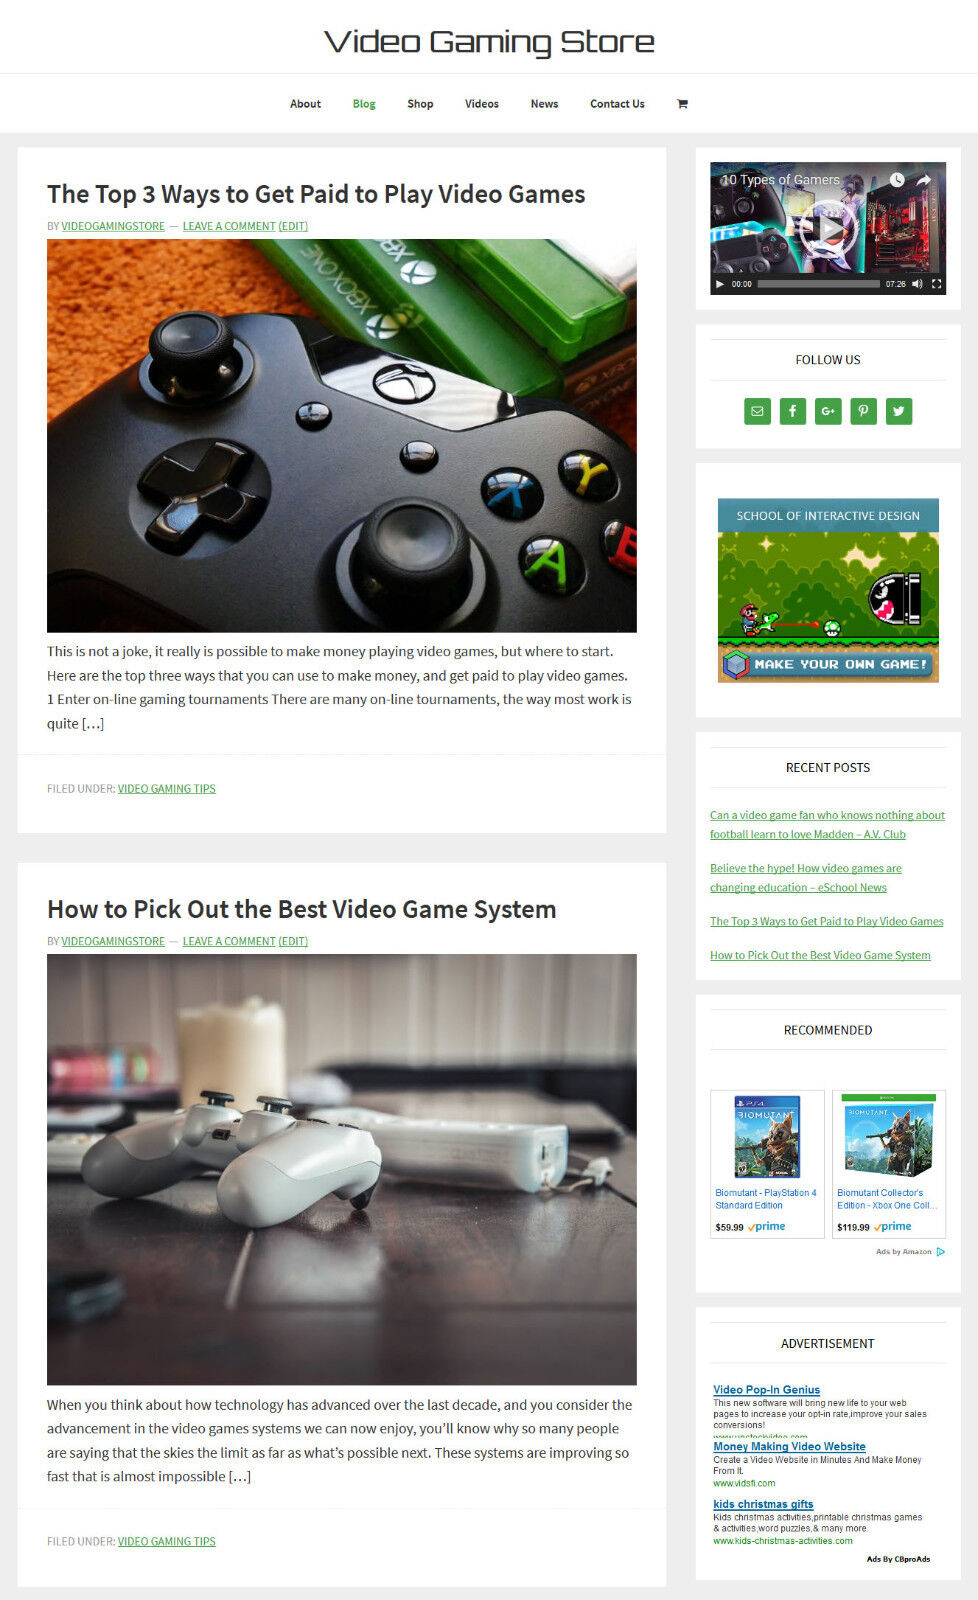 [NEW DESIGN] * VIDEO GAMING * store blog website business for sale AUTO CONTENT 2